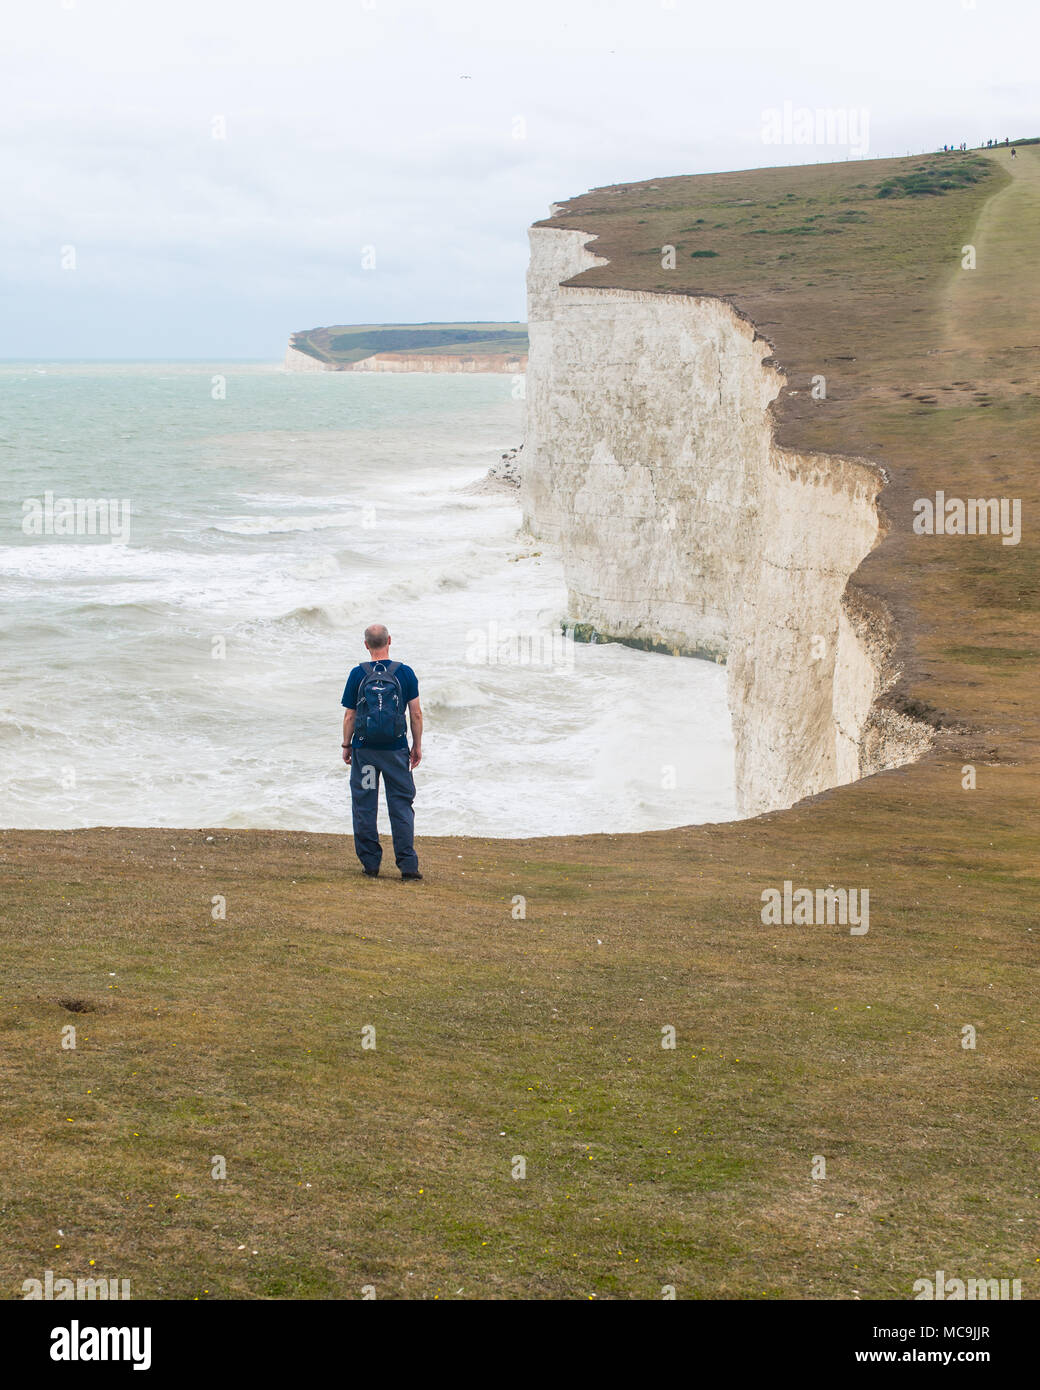 Male hiker wearing backpack from behind admiring the white cliffs of Seven Sisters facing rough sea and waves. Seven sisters, Seaford, UK Stock Photo